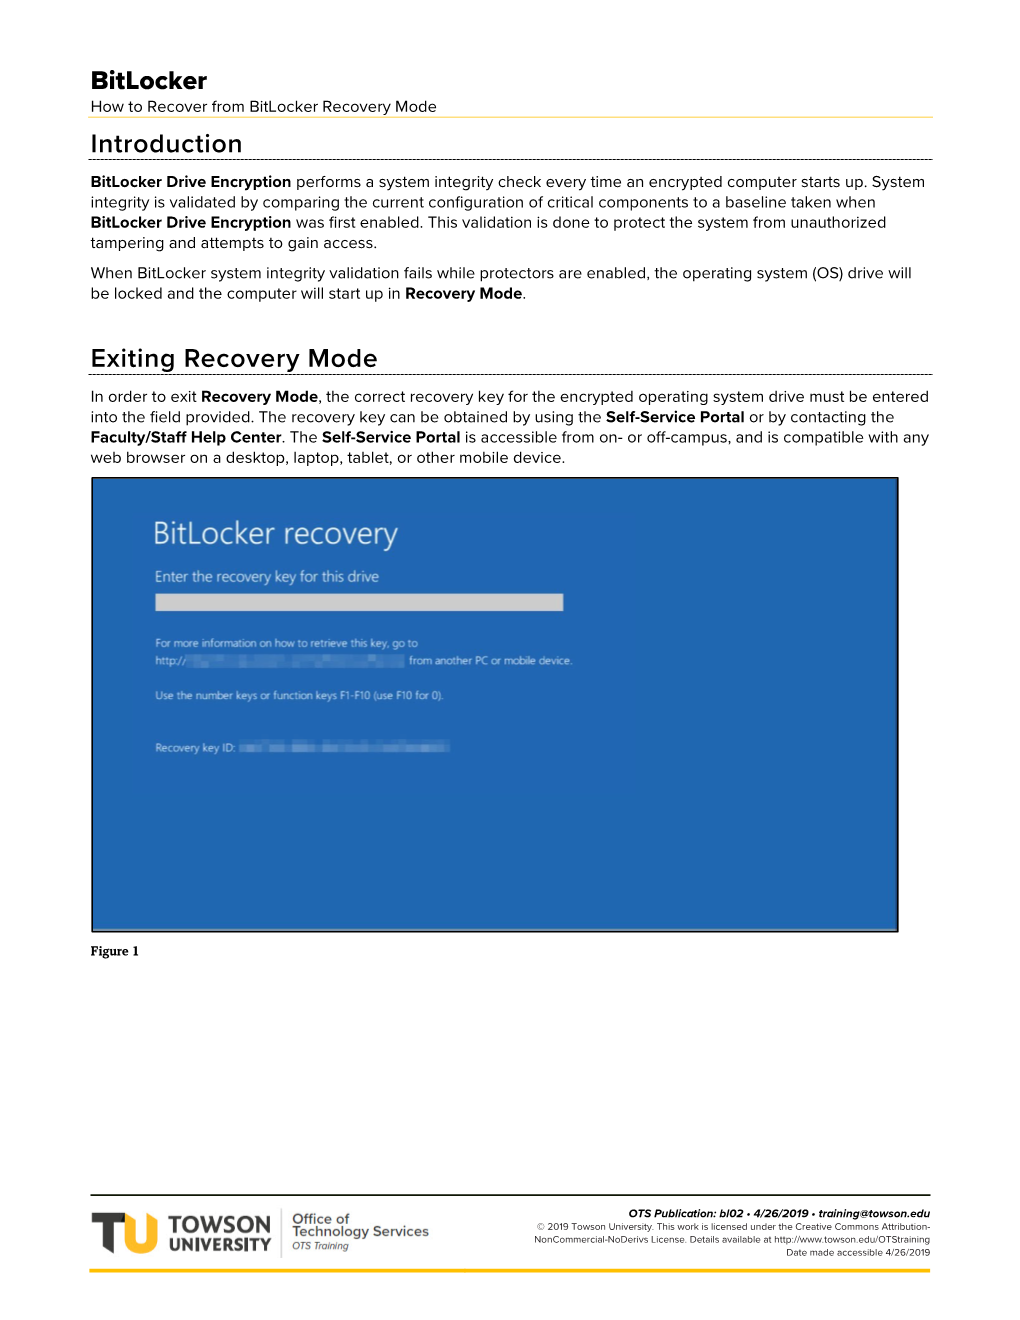 Bitlocker Introduction Exiting Recovery Mode